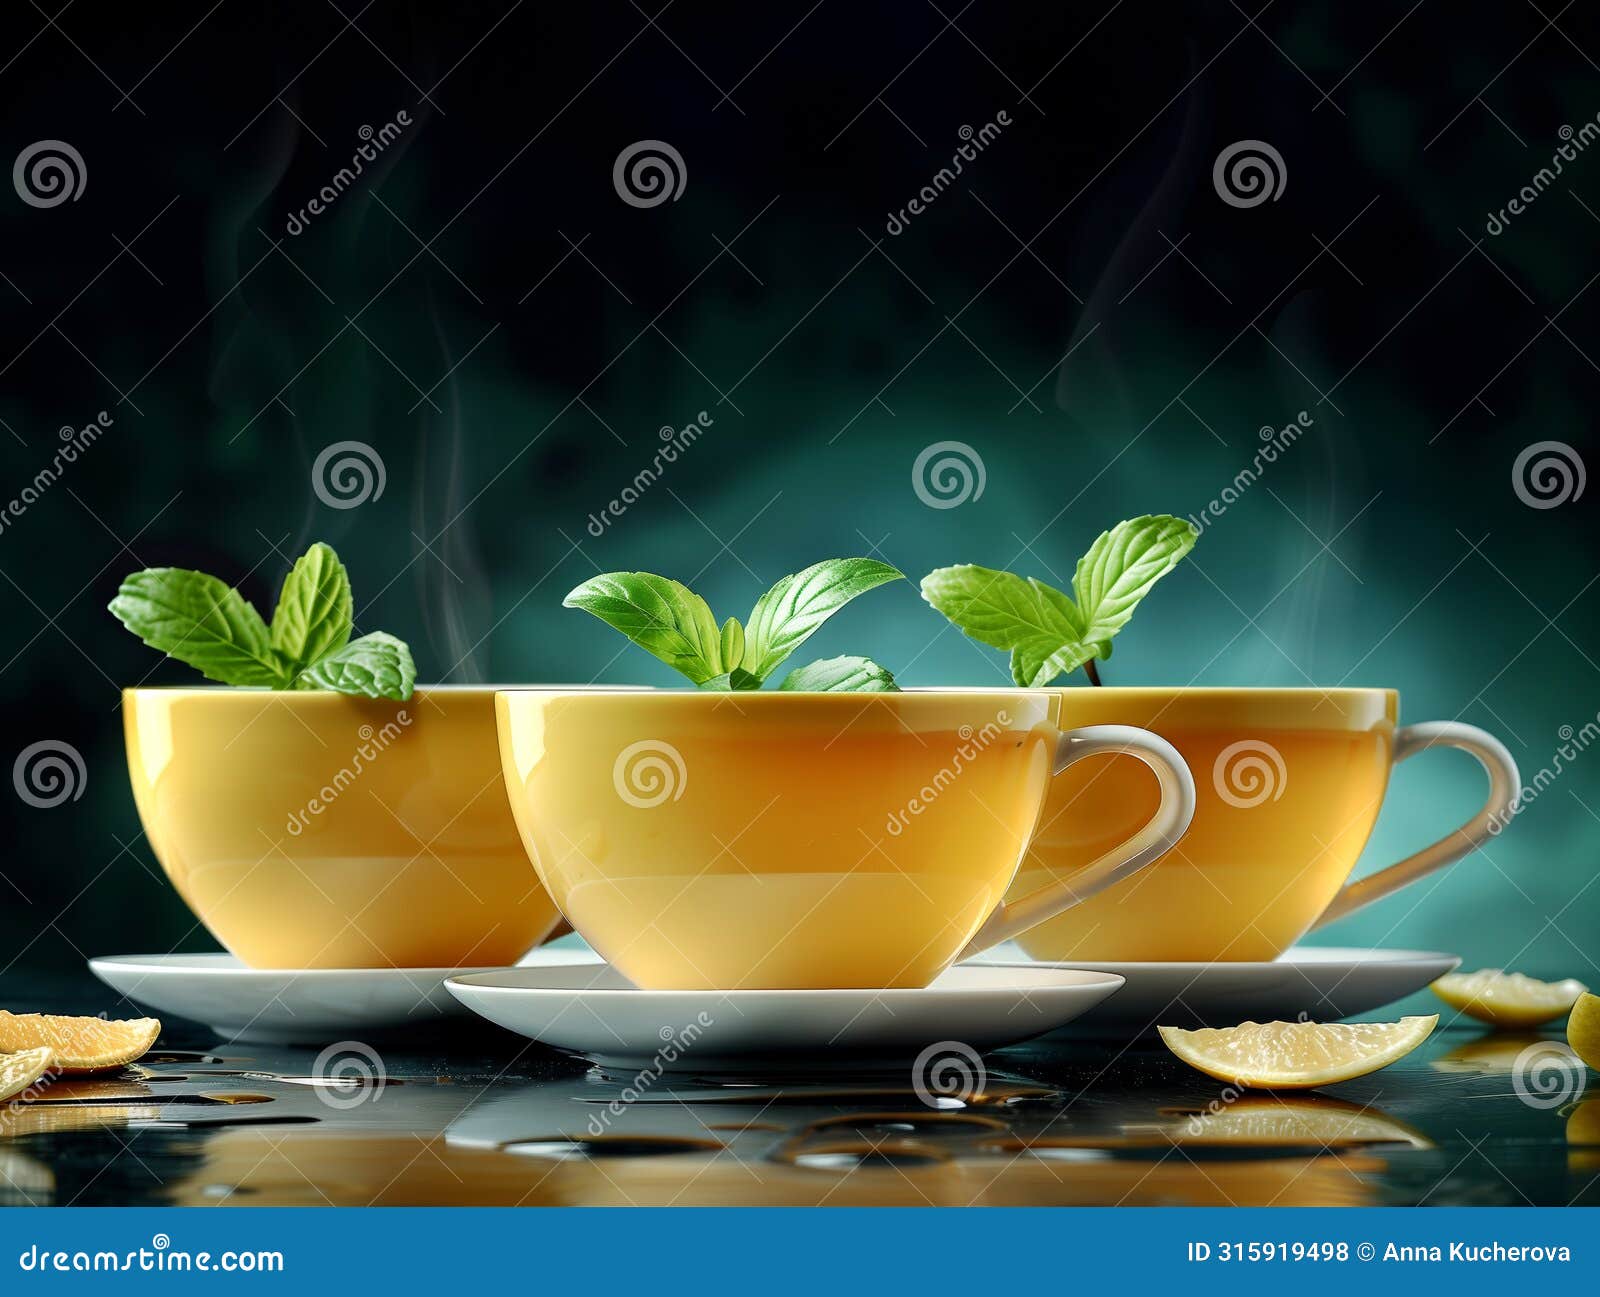 steaming herbal tea in yellow cups with fresh mint and lemon slices